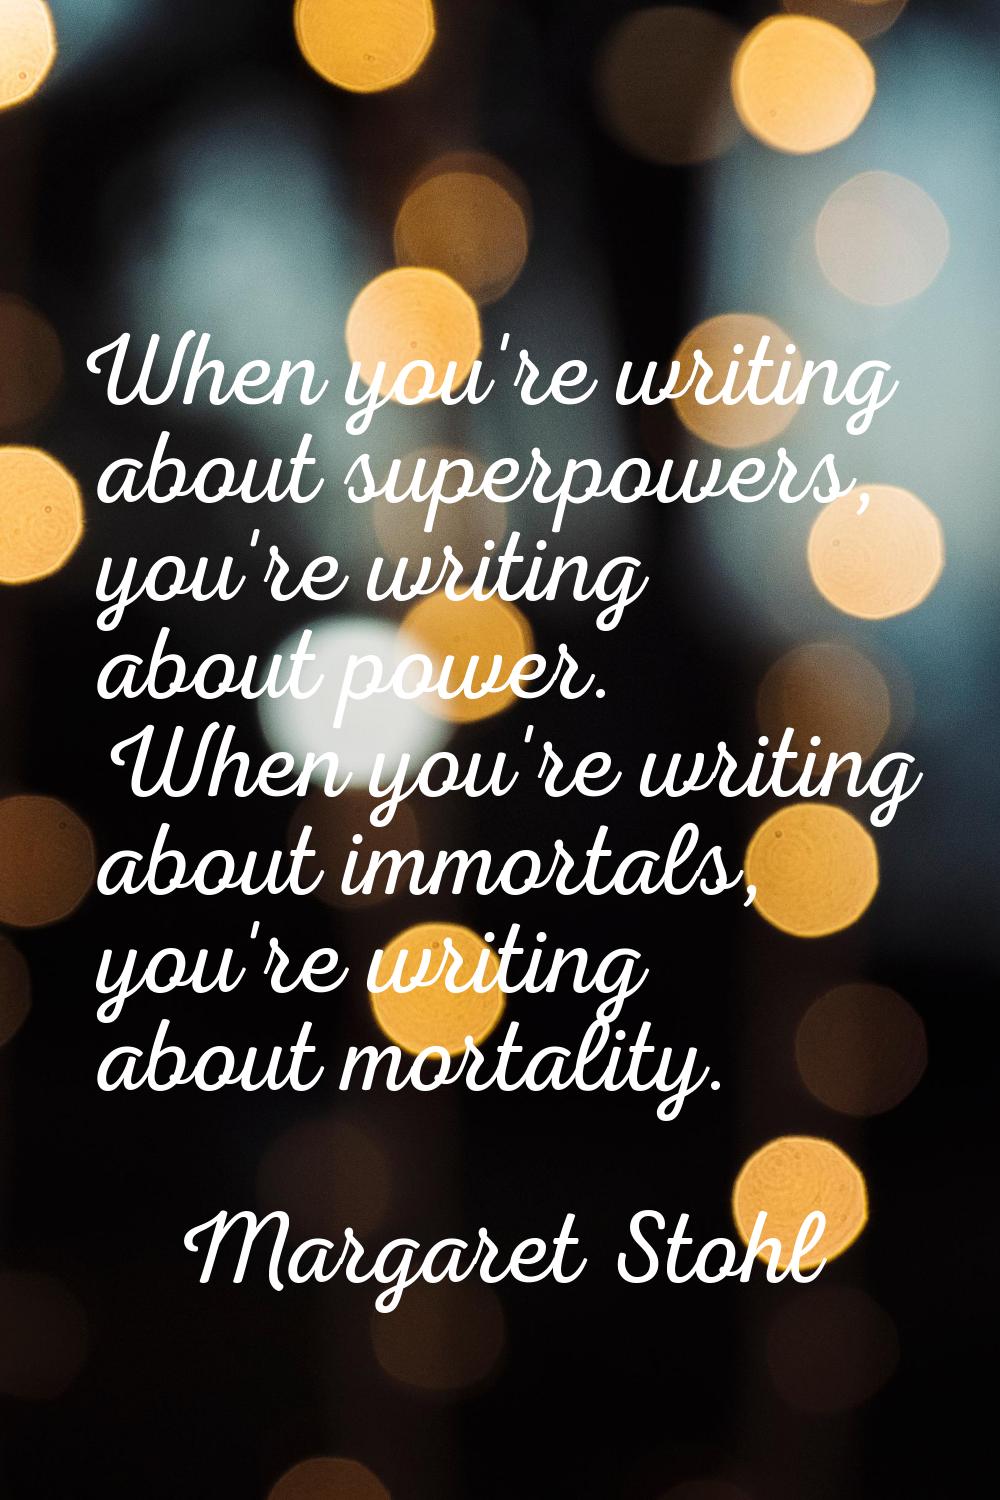 When you're writing about superpowers, you're writing about power. When you're writing about immort